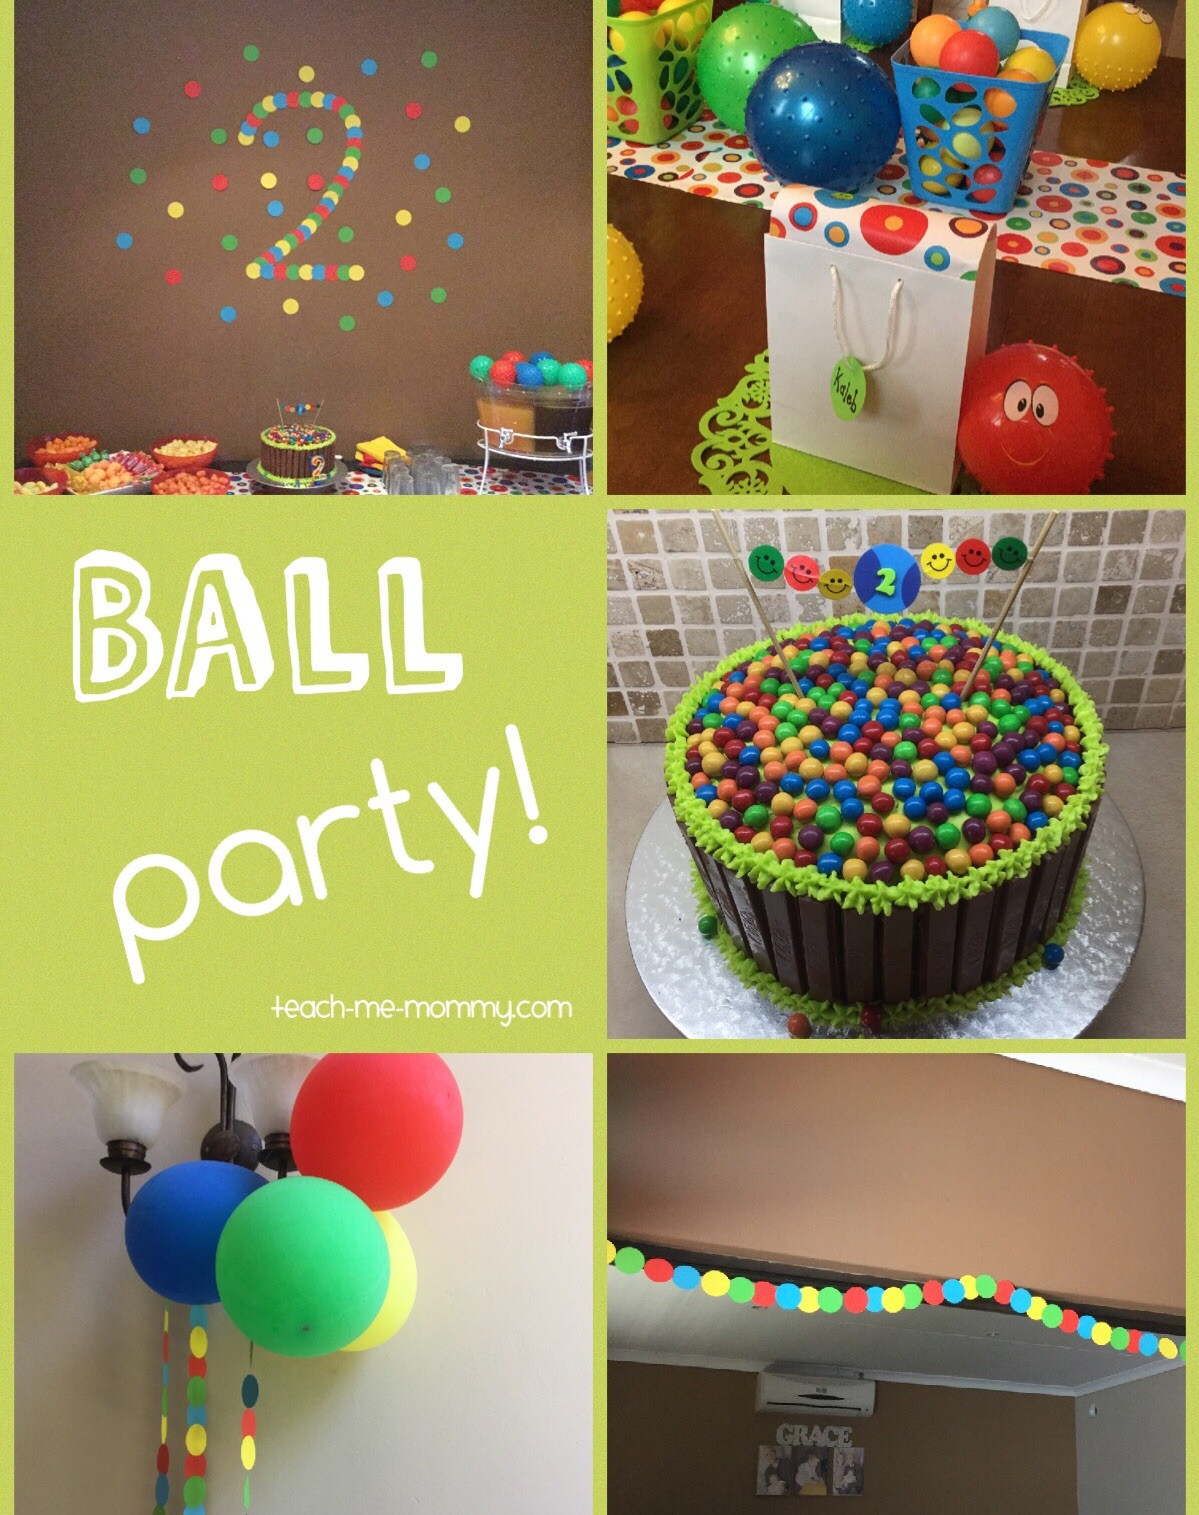 Food Ideas For A 2 Year Old Birthday Party
 Ball Themed Party for a 2 Year Old Teach Me Mommy